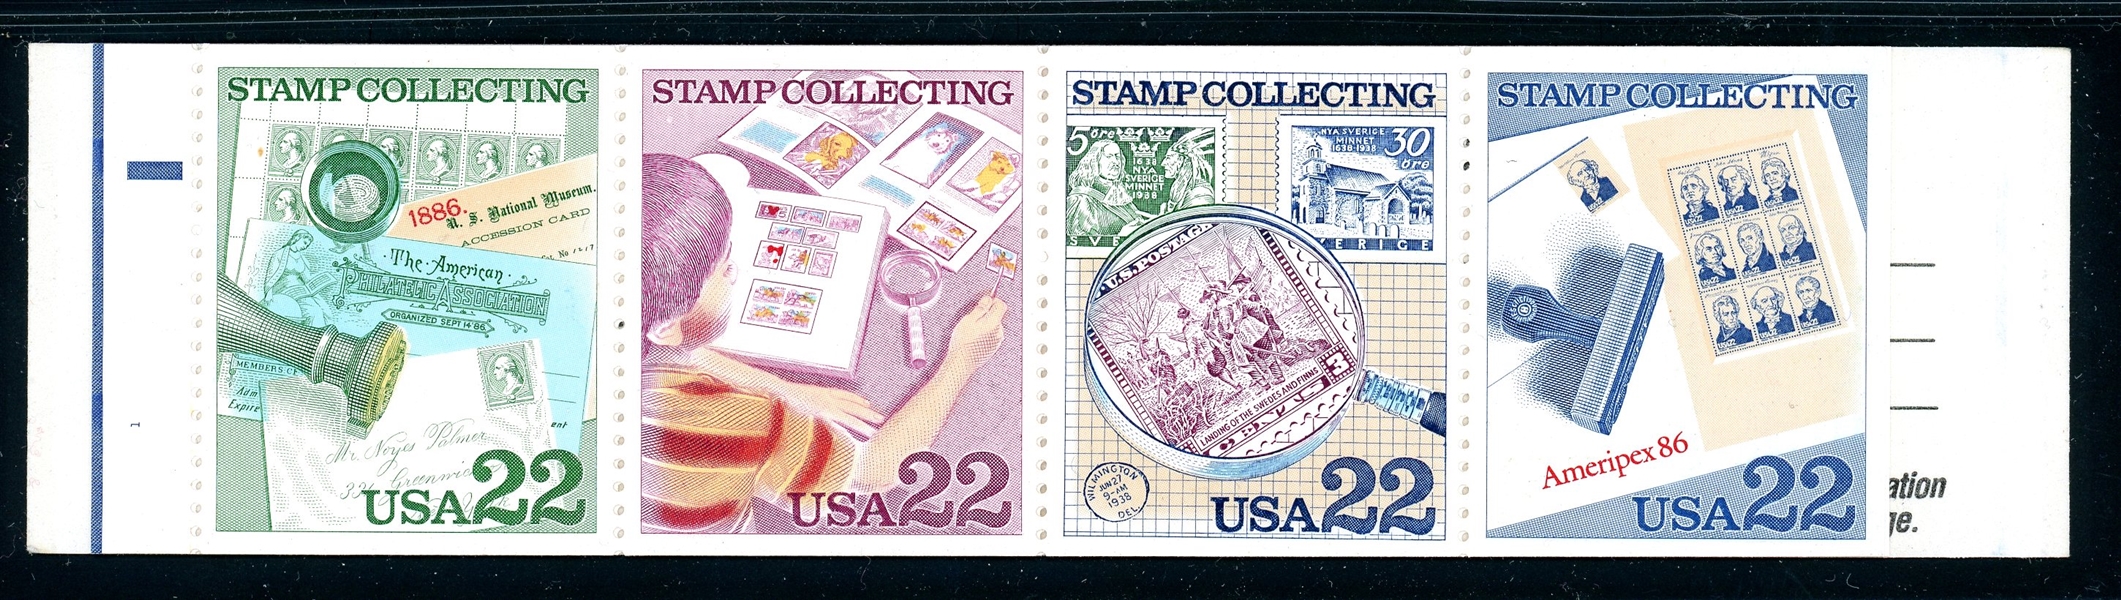 USA Scott BK153a Complete Booklet, Black Omitted Stamp Collecting (SCV $100)